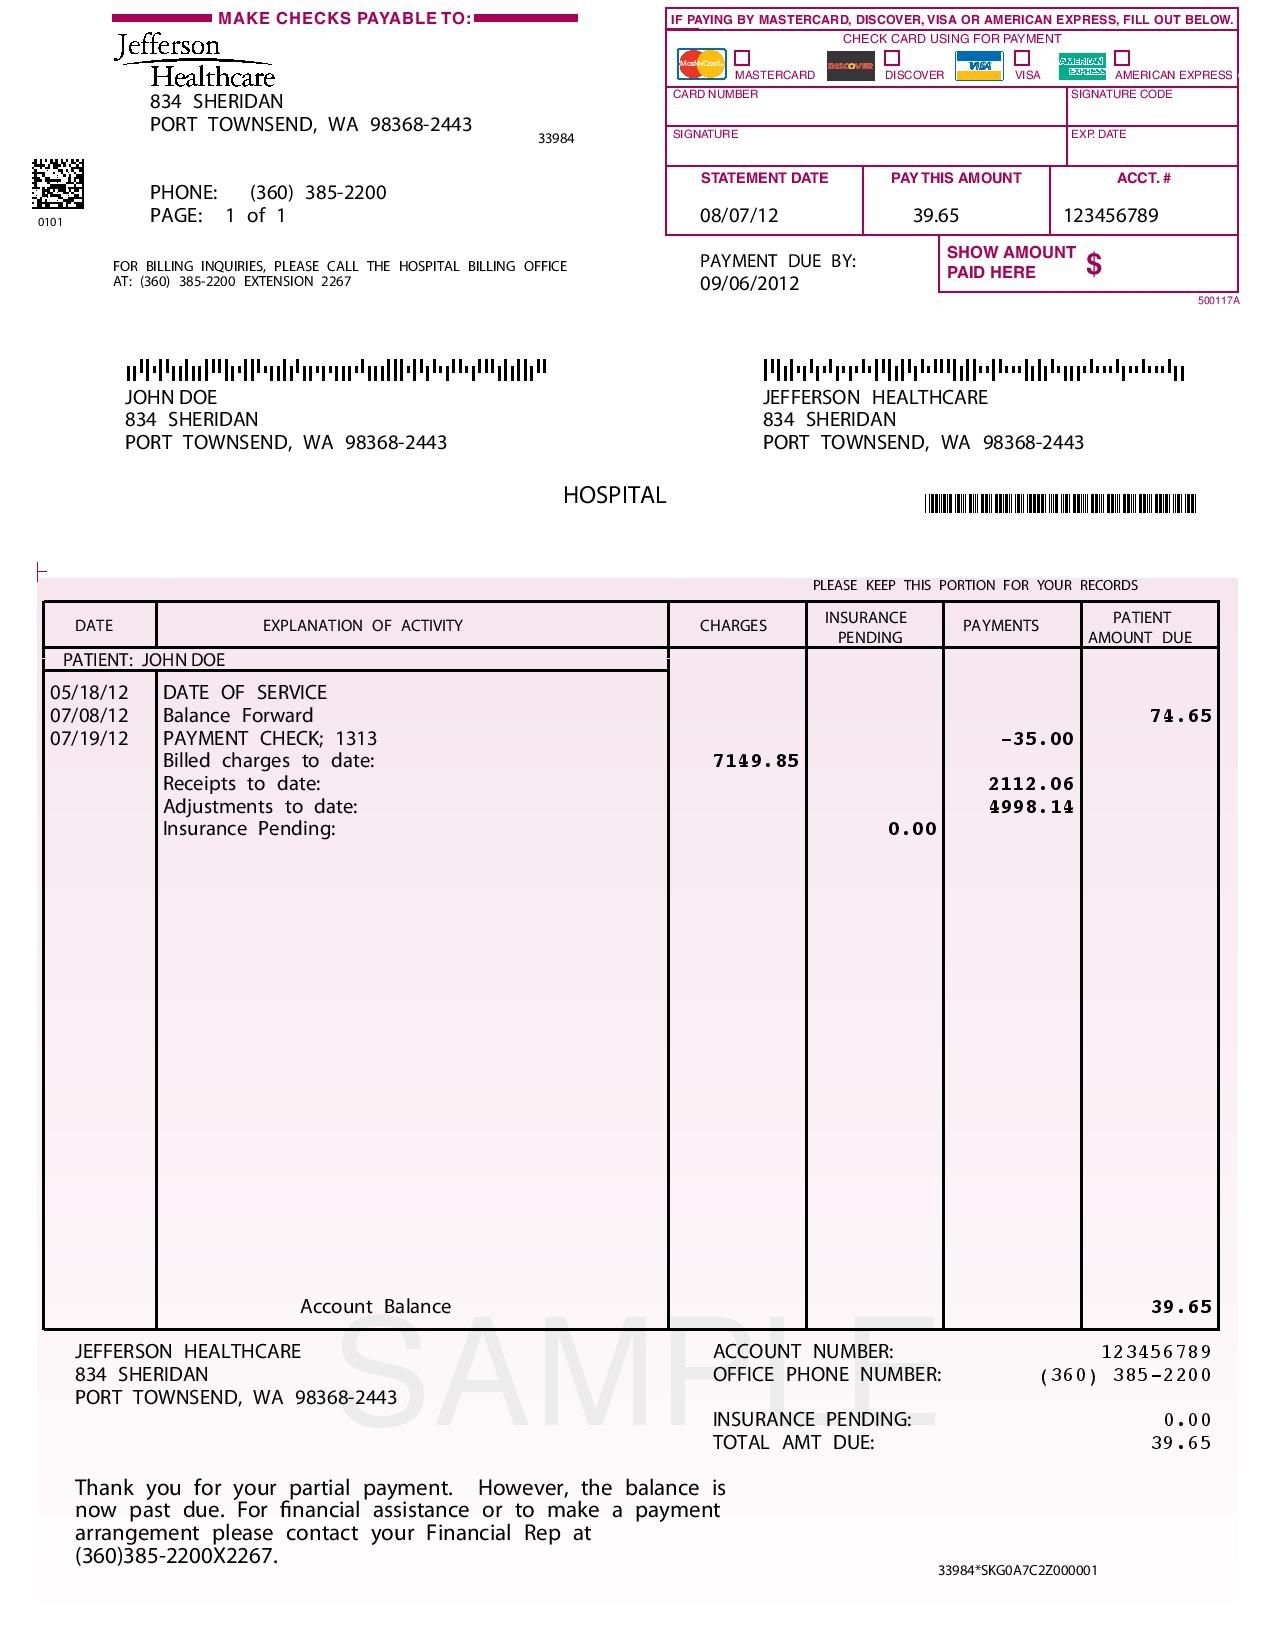 10 best images of sample of invoice for payment sample example of paid in full invoice